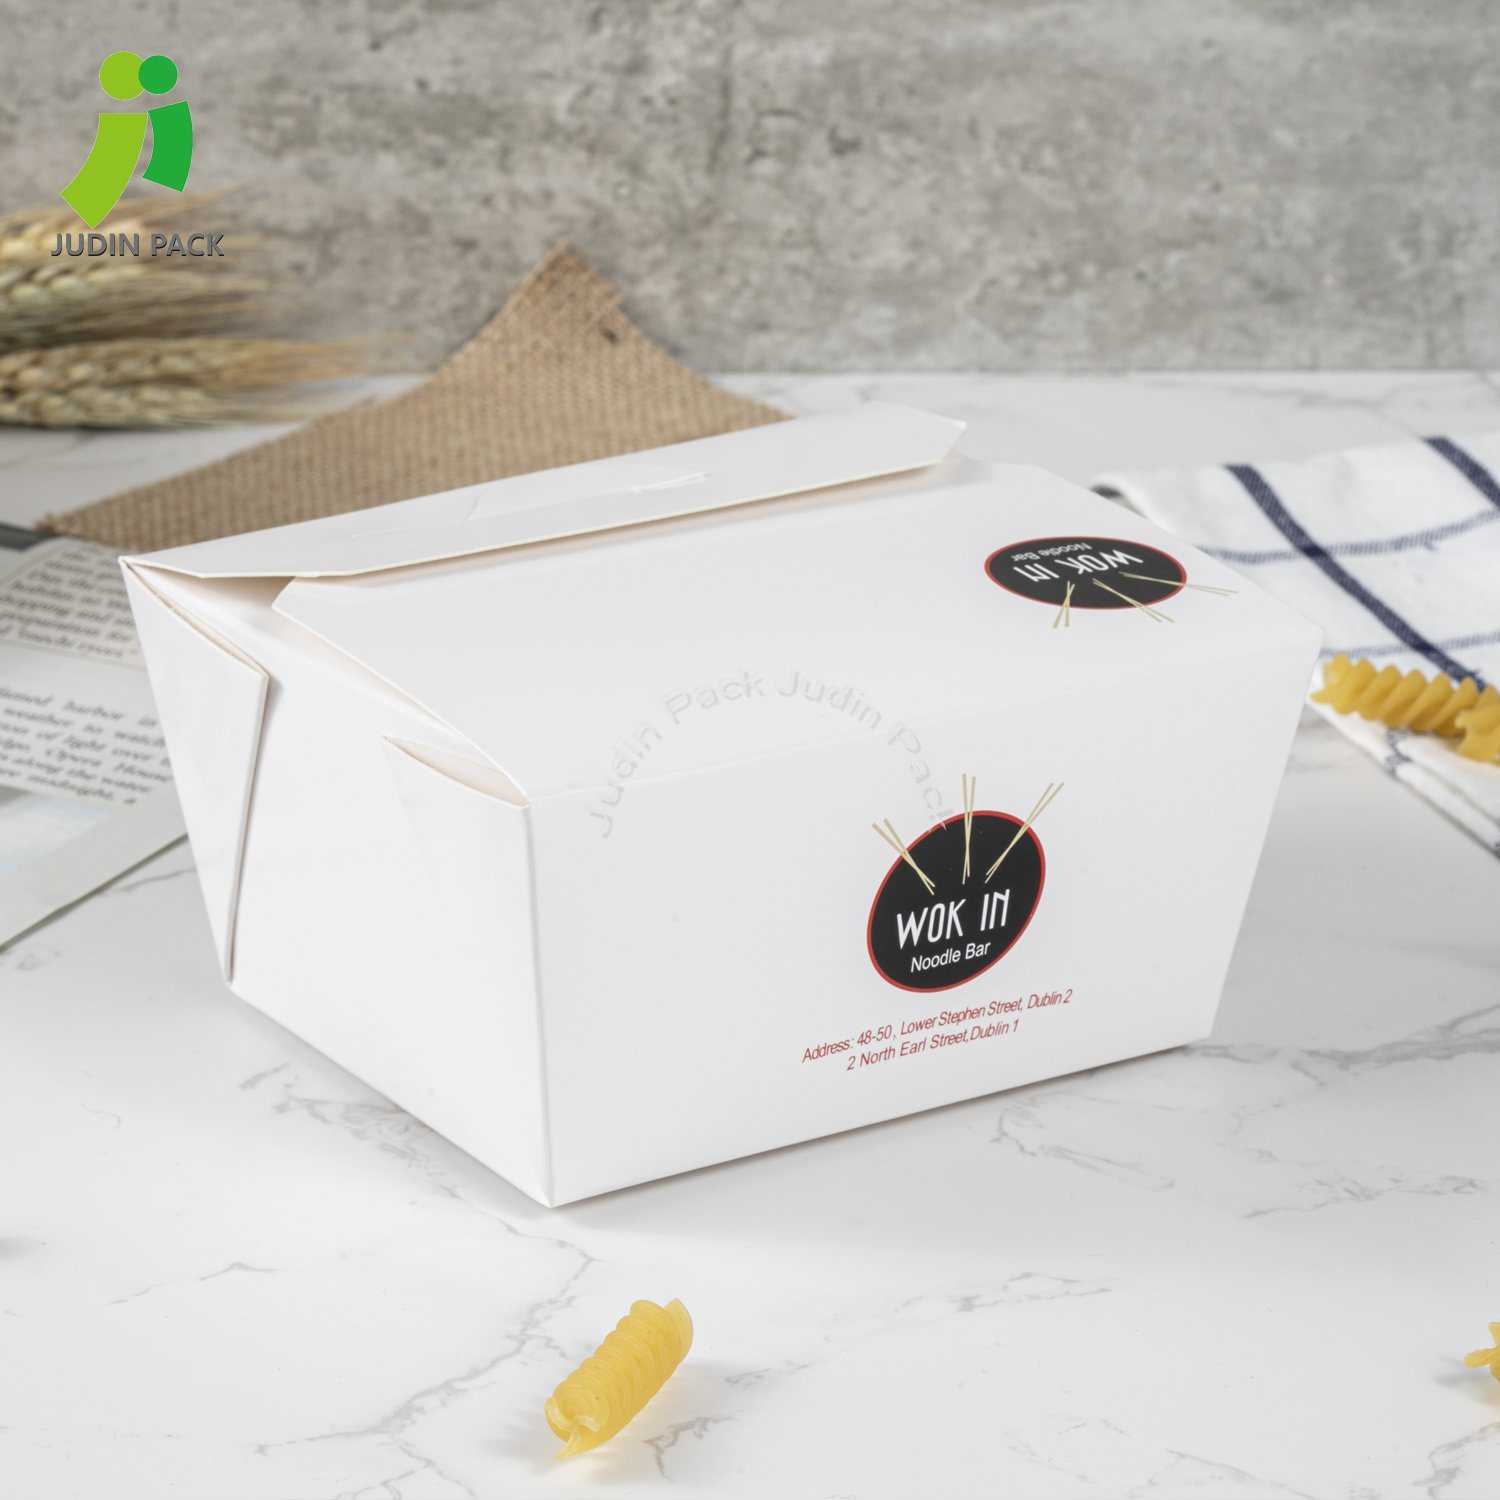 Takeaway-Food-Box-with-Window-for-Takeout-Box-Fast-Food-Restaurants